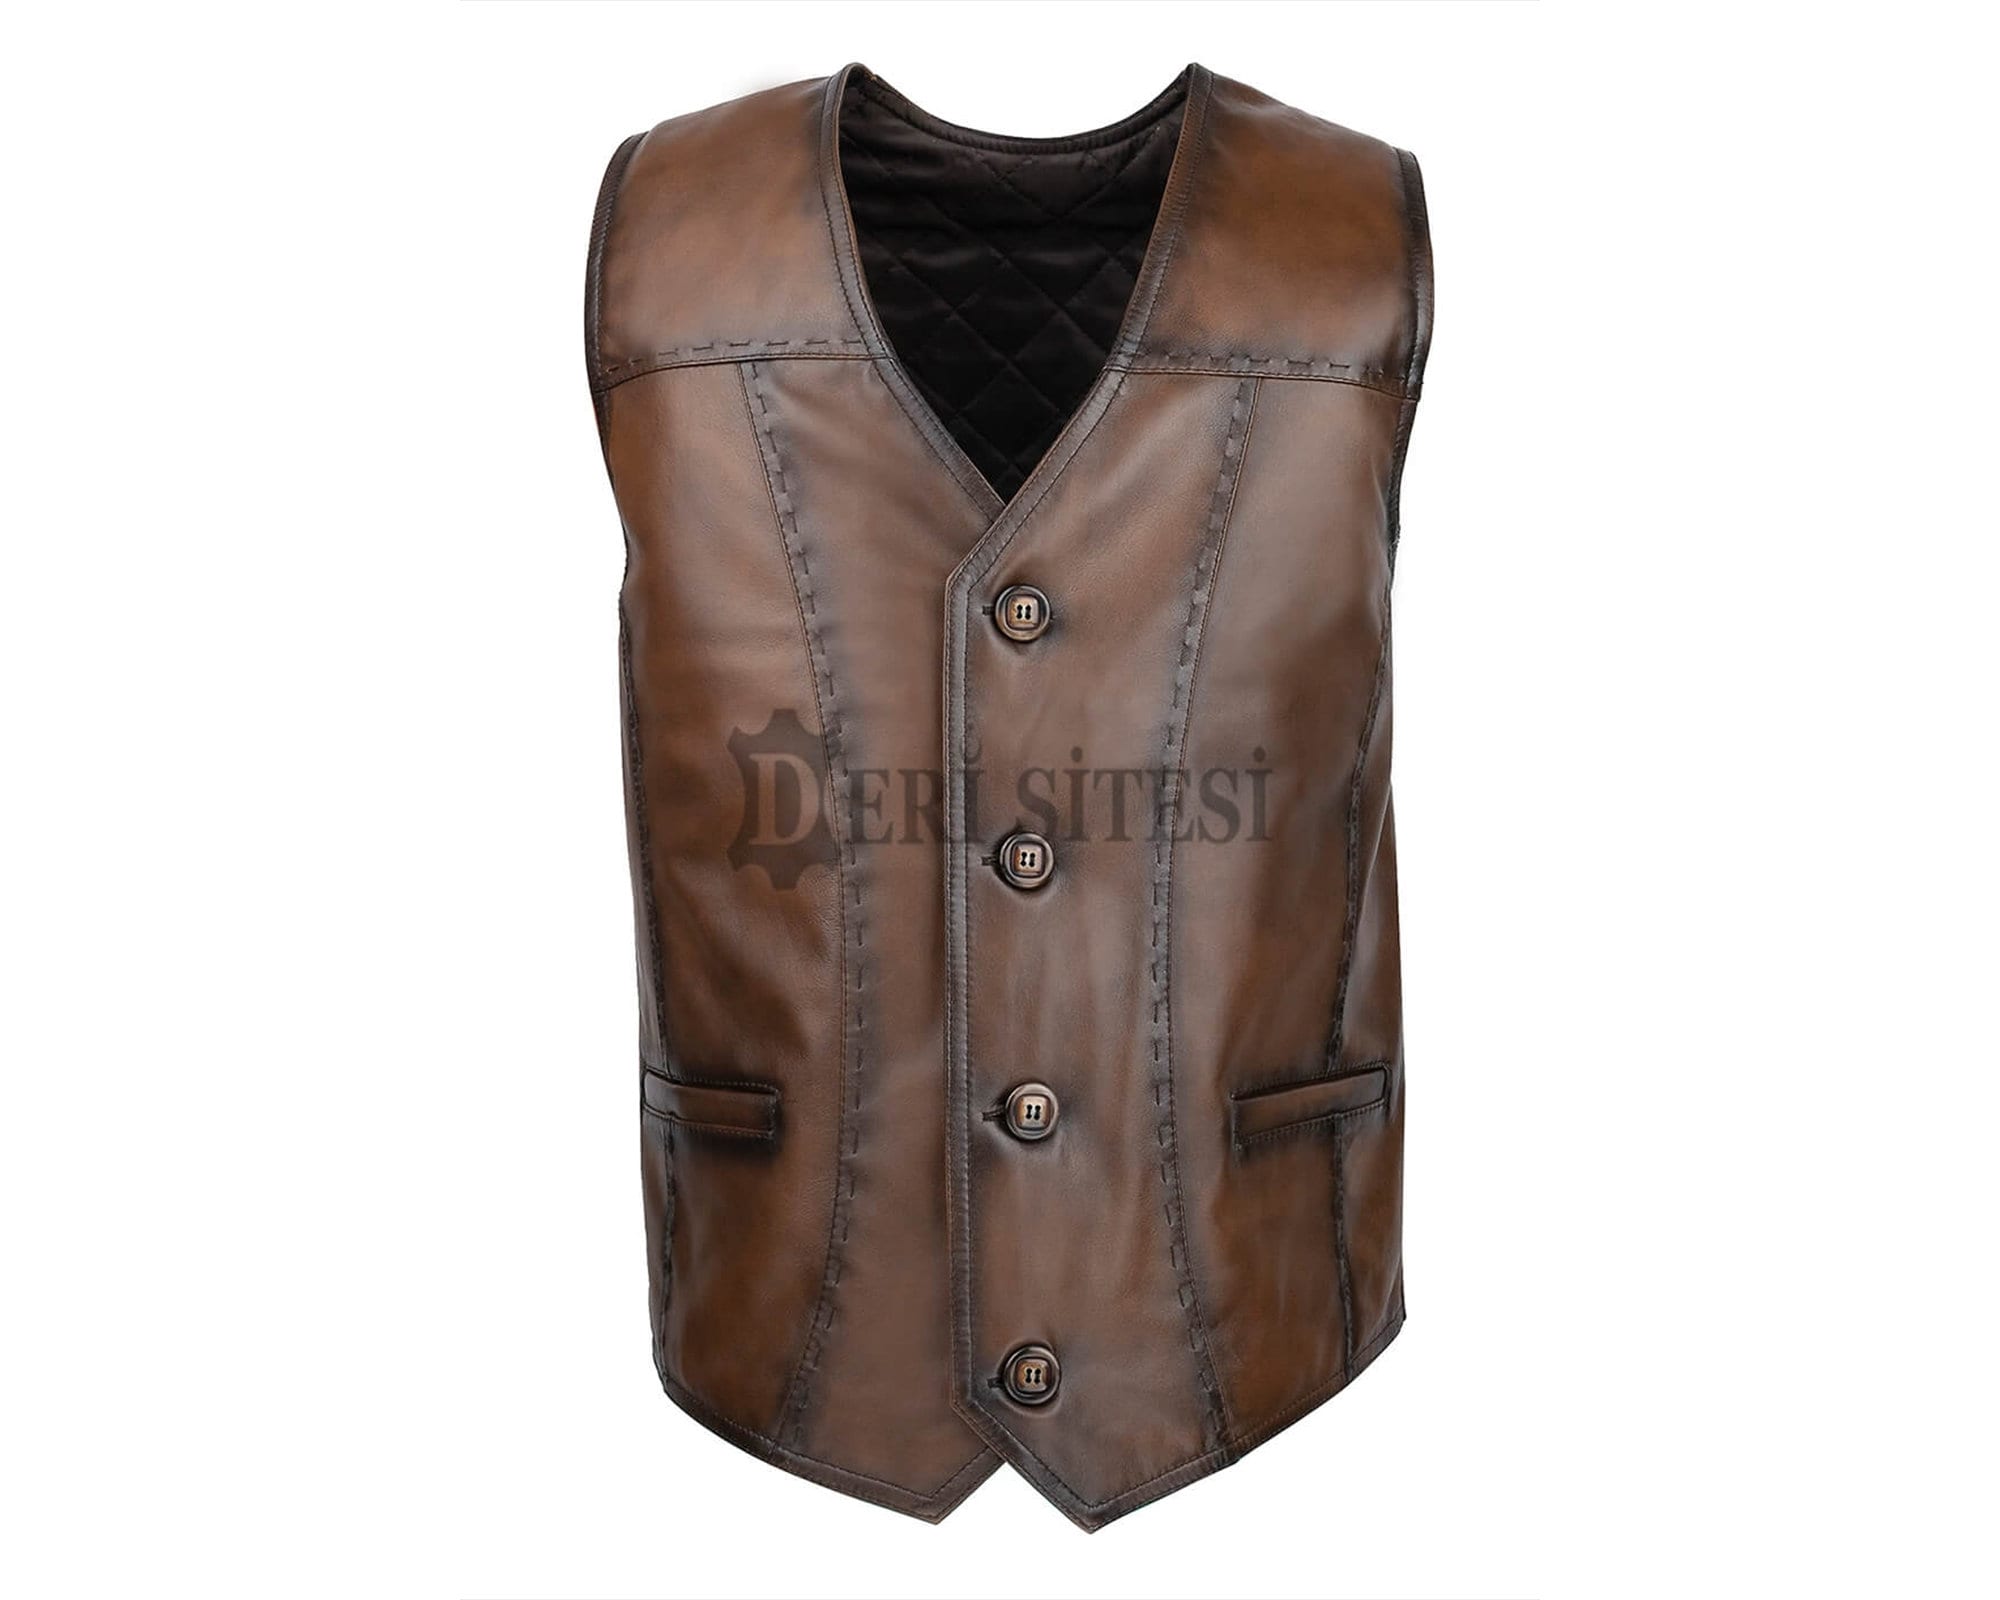 Men's Soft Brown Leather Waistcoat: A Classic, Versatile Piece for Any Occasion